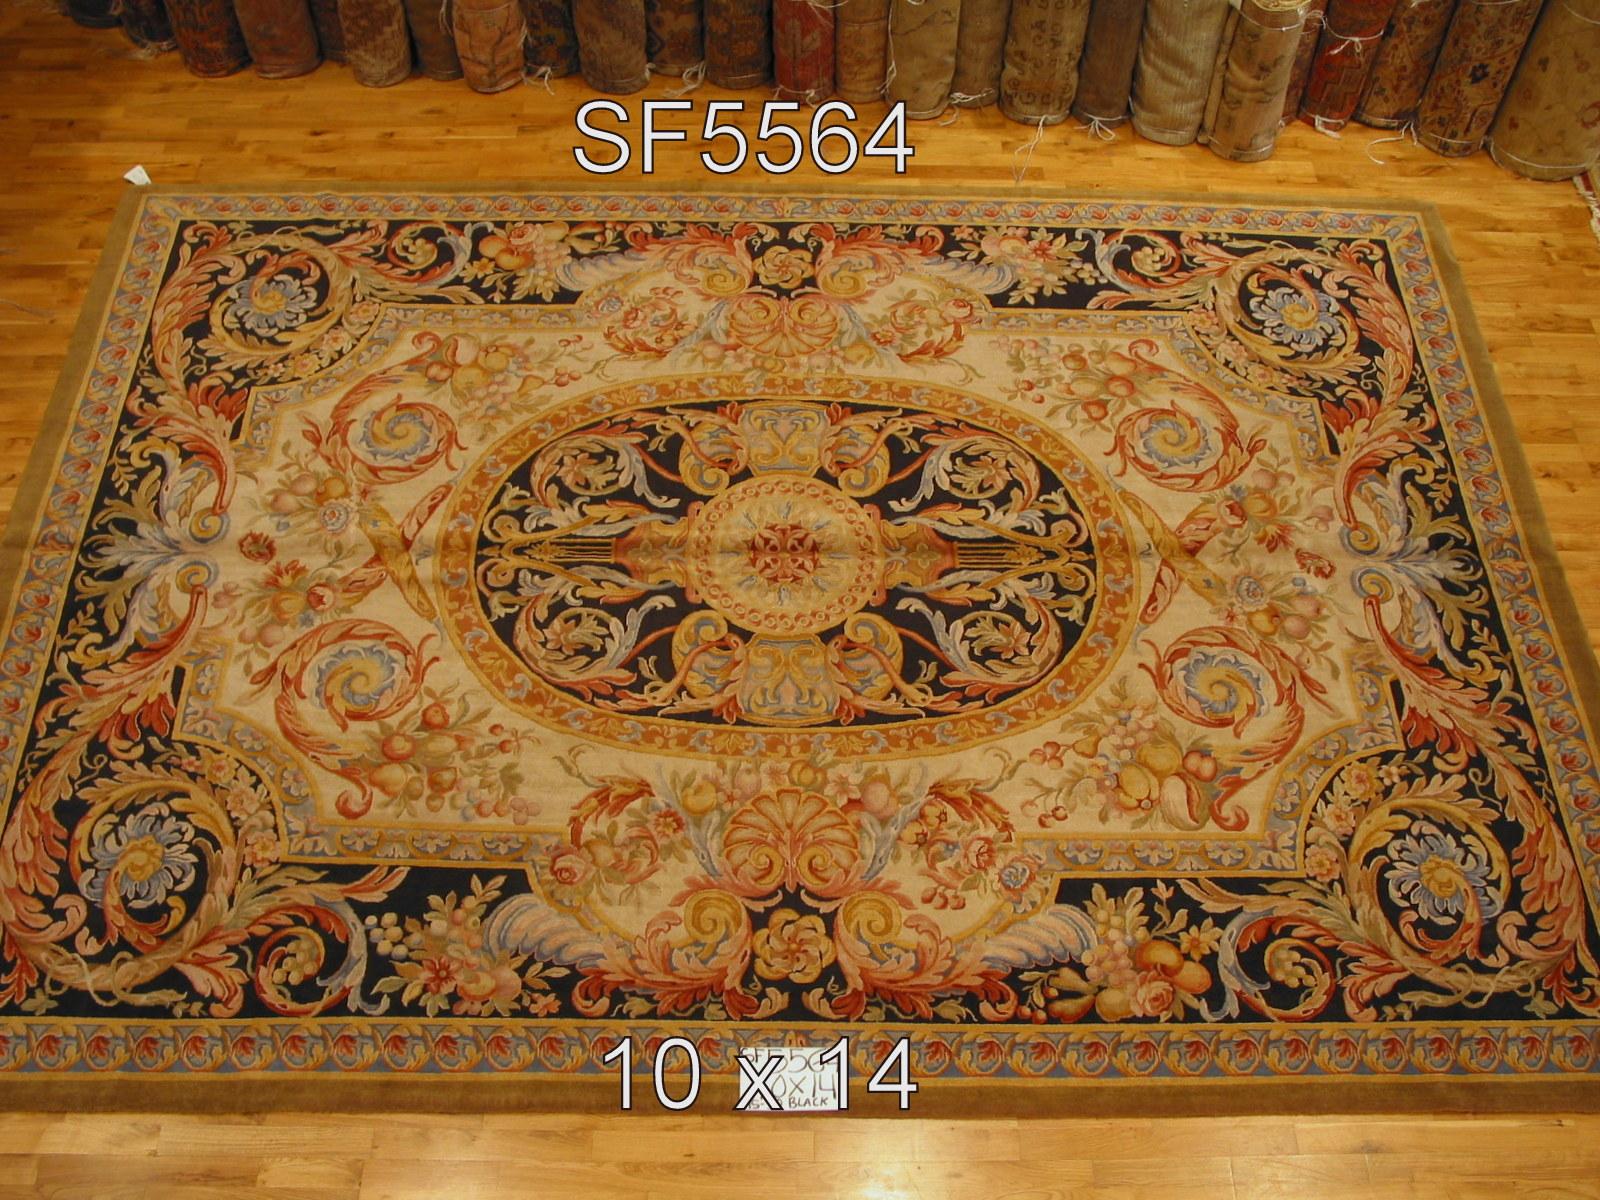 The Savonnerie rug style dates back to the French royal courts of the 17th century when domestic workshops were established to replace the importation of Oriental rugs. Ultimately a distinctly French style emerged that has survived to this